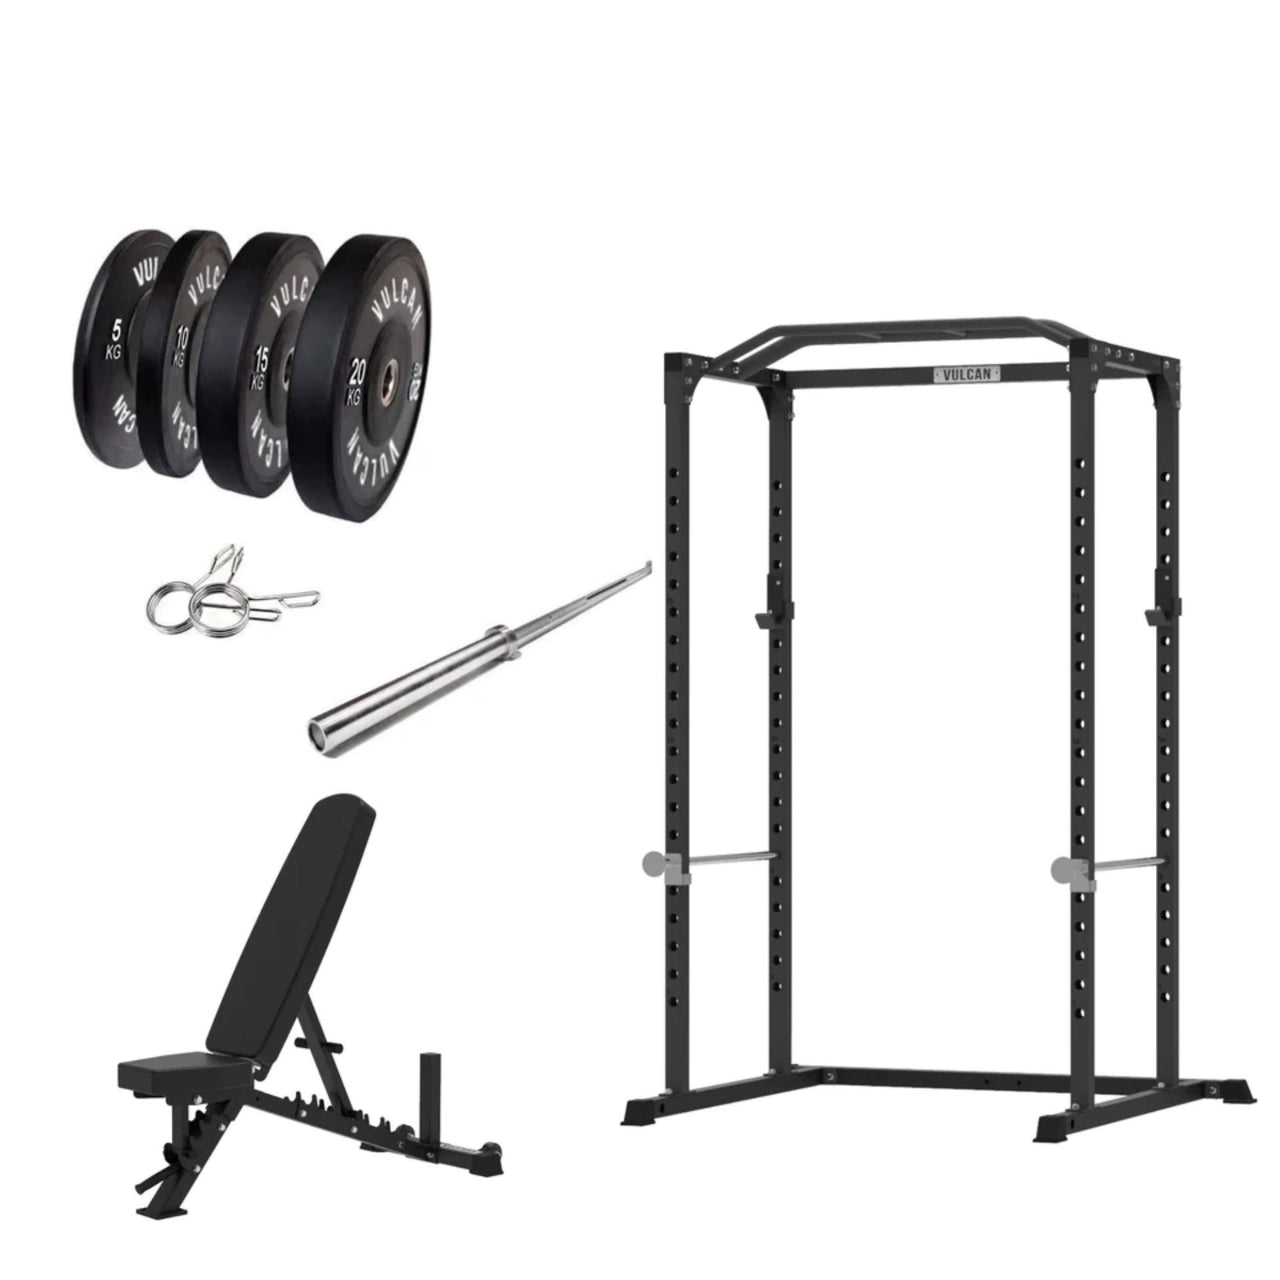 VULCAN Home Gym Power Cage, Olympic Barbell, 100kg Black Bumper Weight Plates & Pro Adjustable Bench | IN STOCK